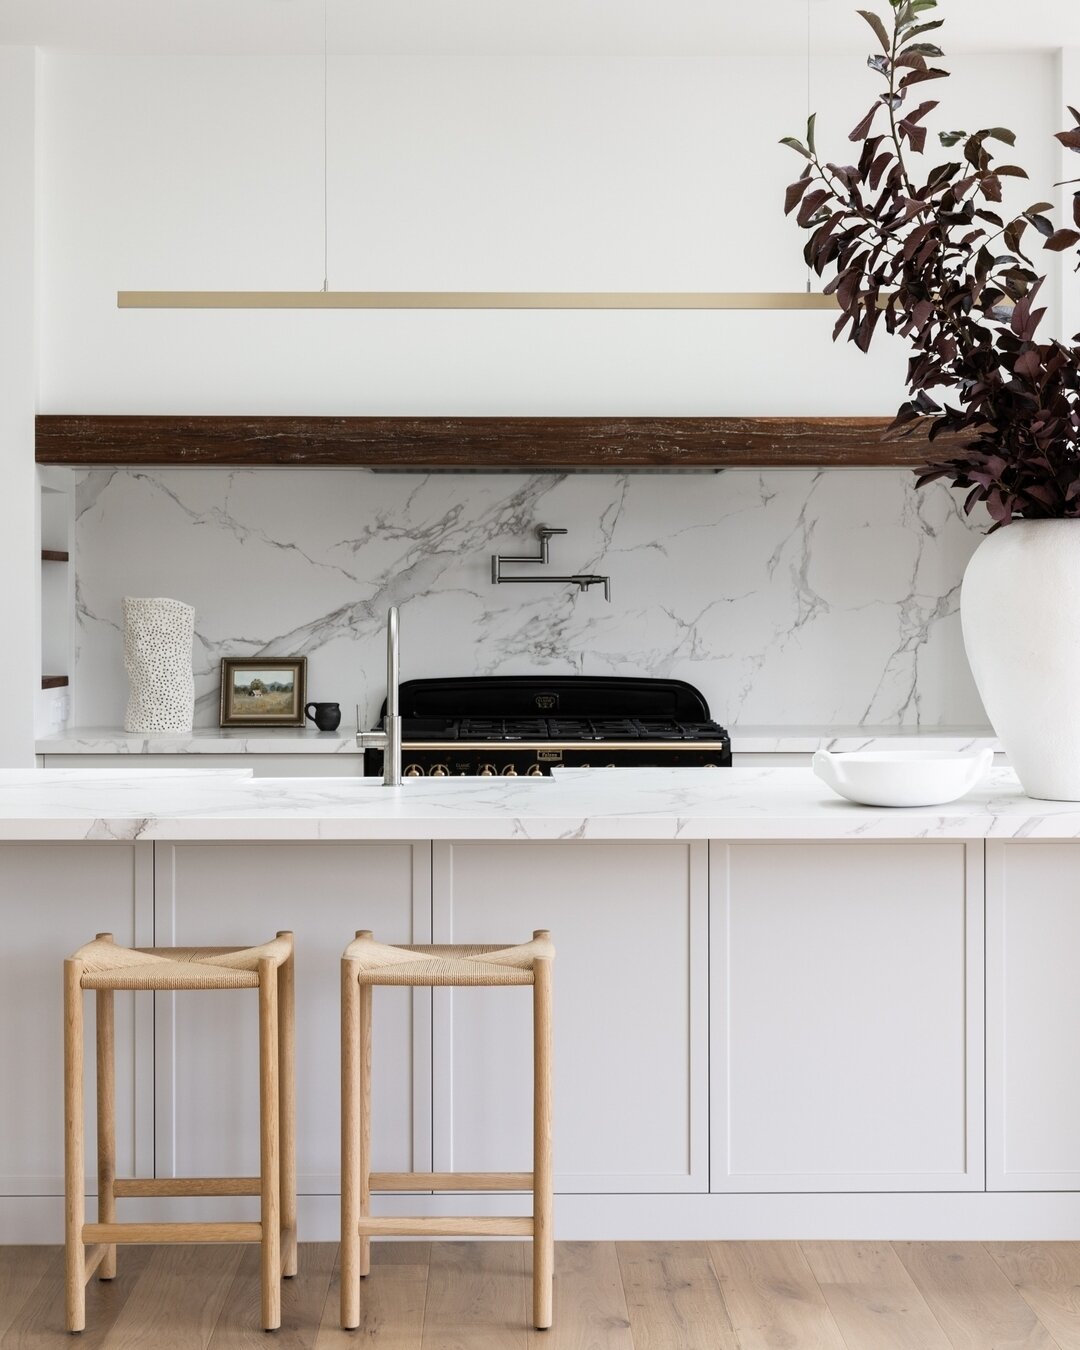 We are having a lot of conversations with clients about bench tops at the moment - given the ban on engineered stone that comes into effect throughout Australia on 1 July.

The good news is there are many alternatives available - including porcelain 